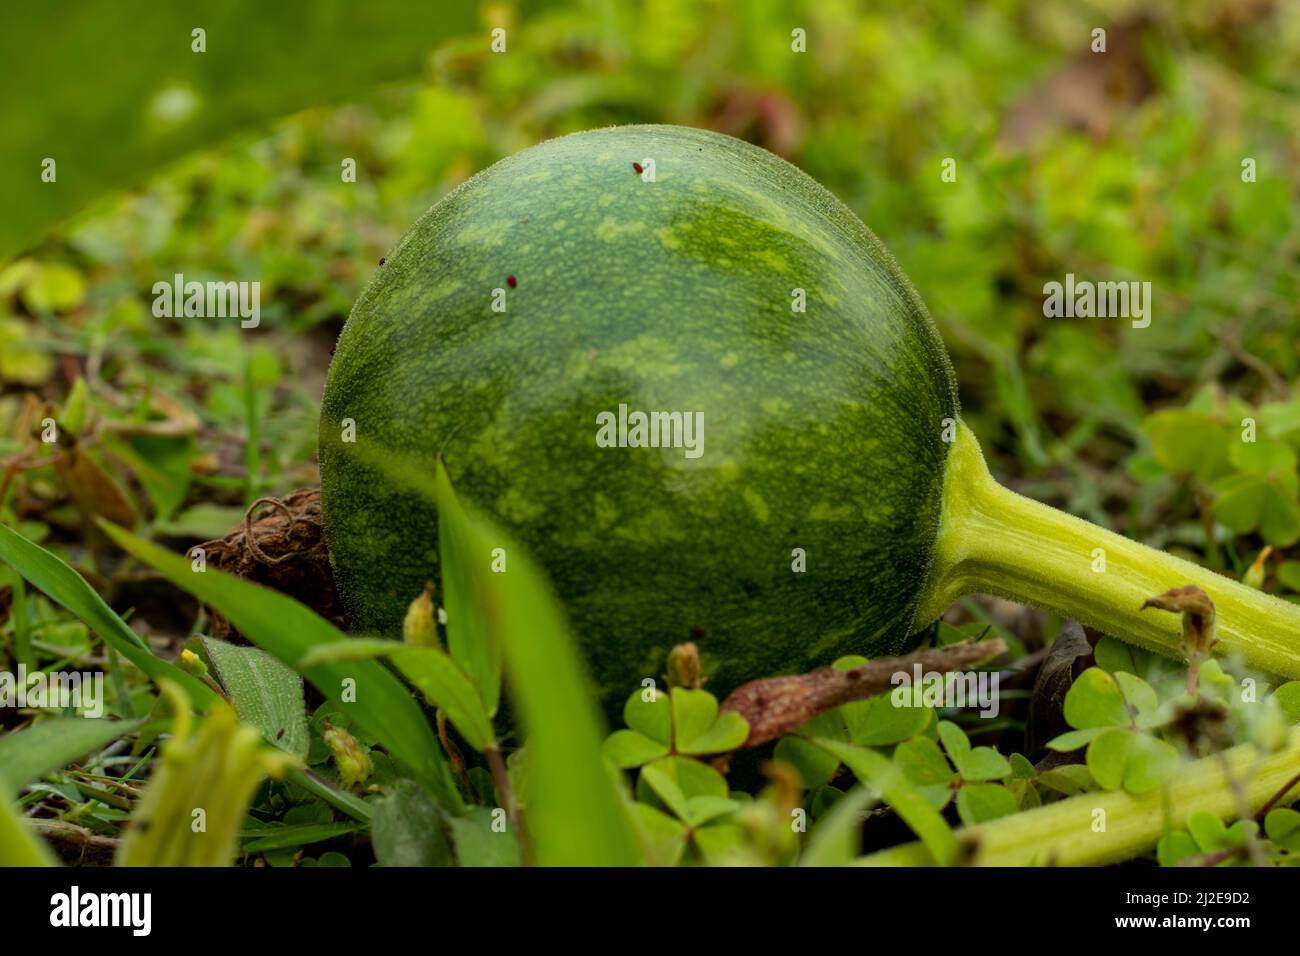 Green Pumpkins are round Curcubita winter squash with green-colored skin Stock Photo